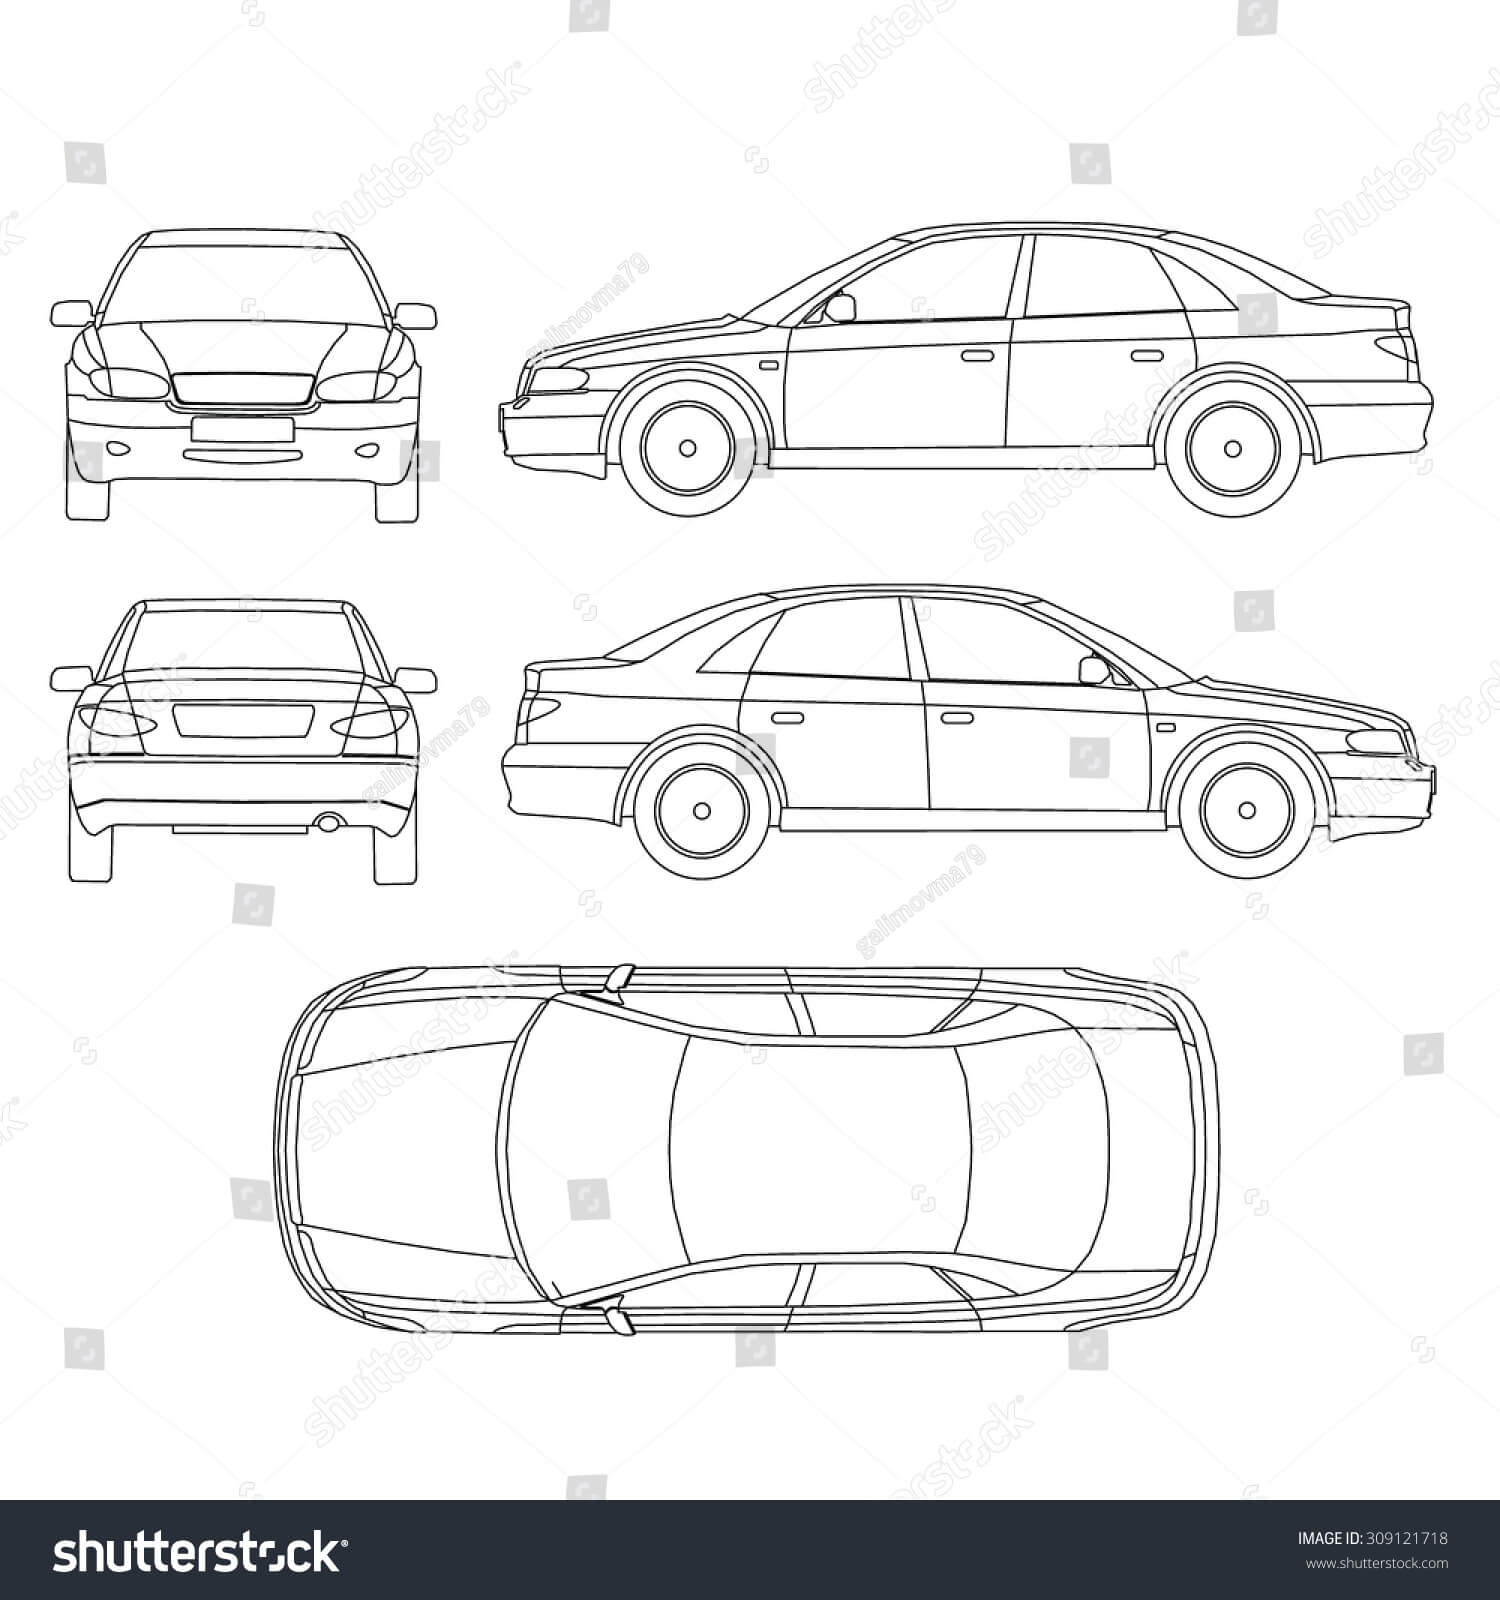 Car Line Draw Insurance, Rent Damage,… Stock Photo 309121718 Intended For Car Damage Report Template